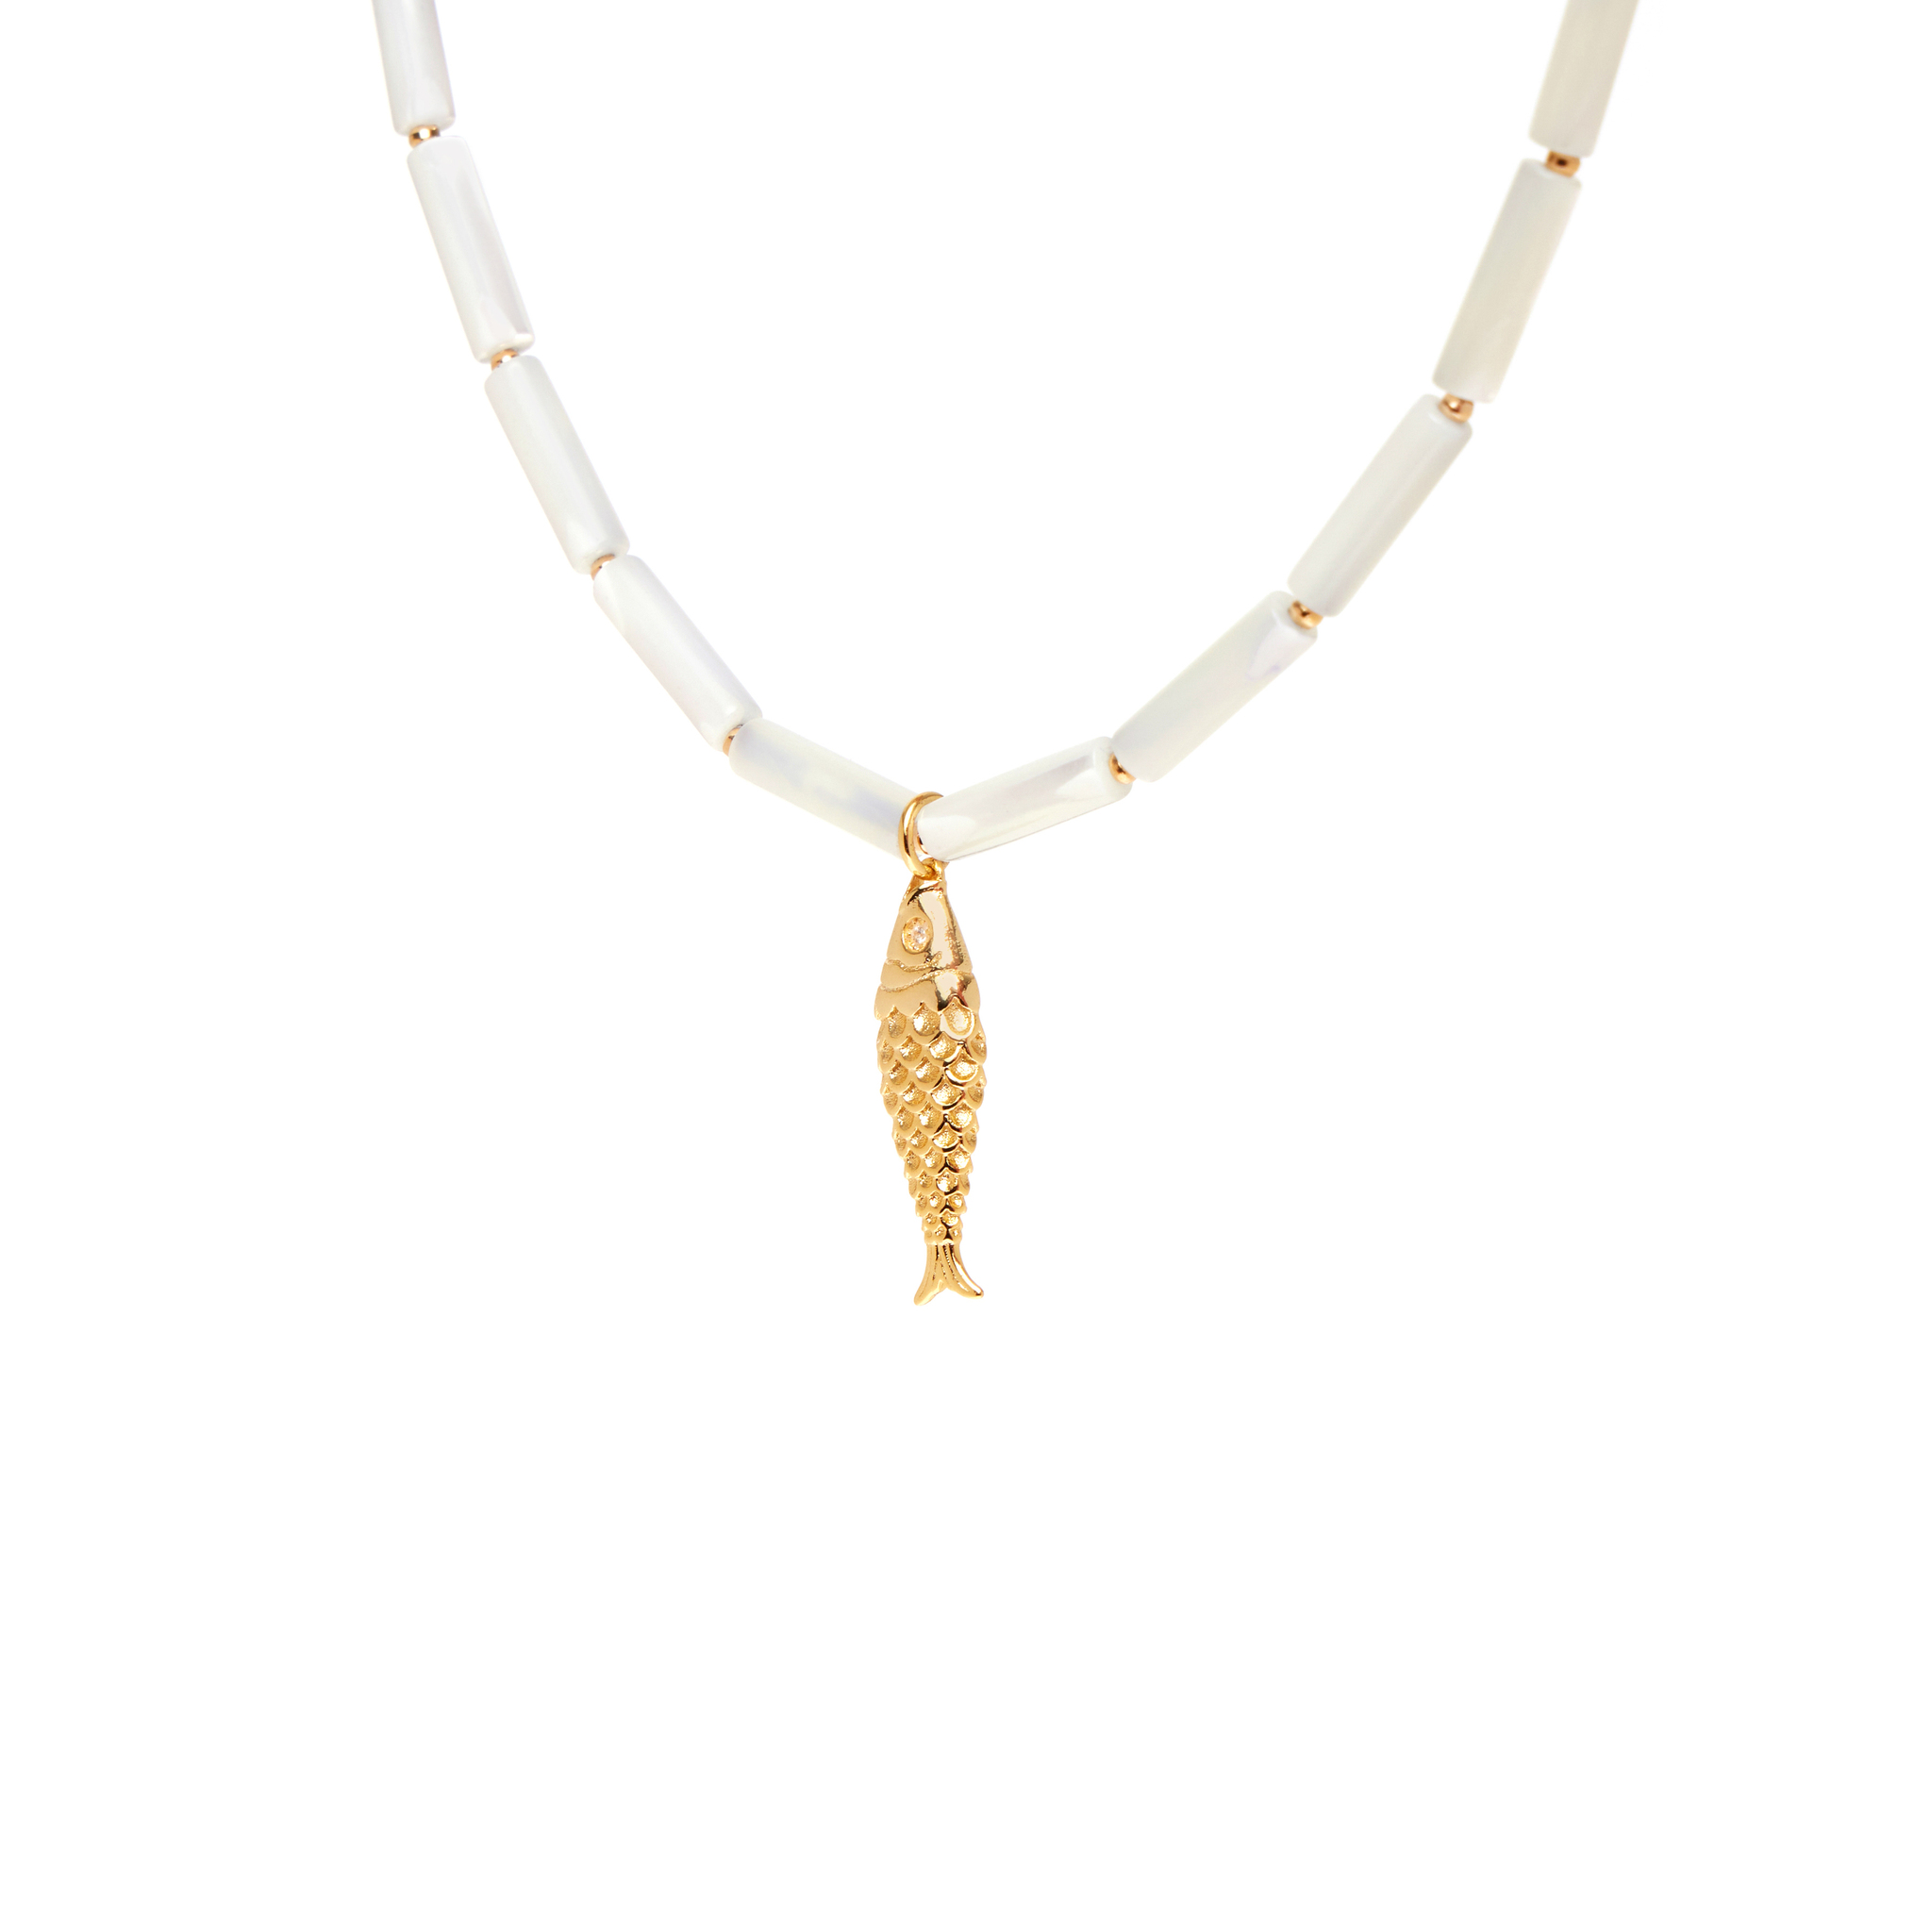 HOLLY JUNE Колье Gold Fish Tube Necklace - Pearl holly june колье naive pearl cross necklace